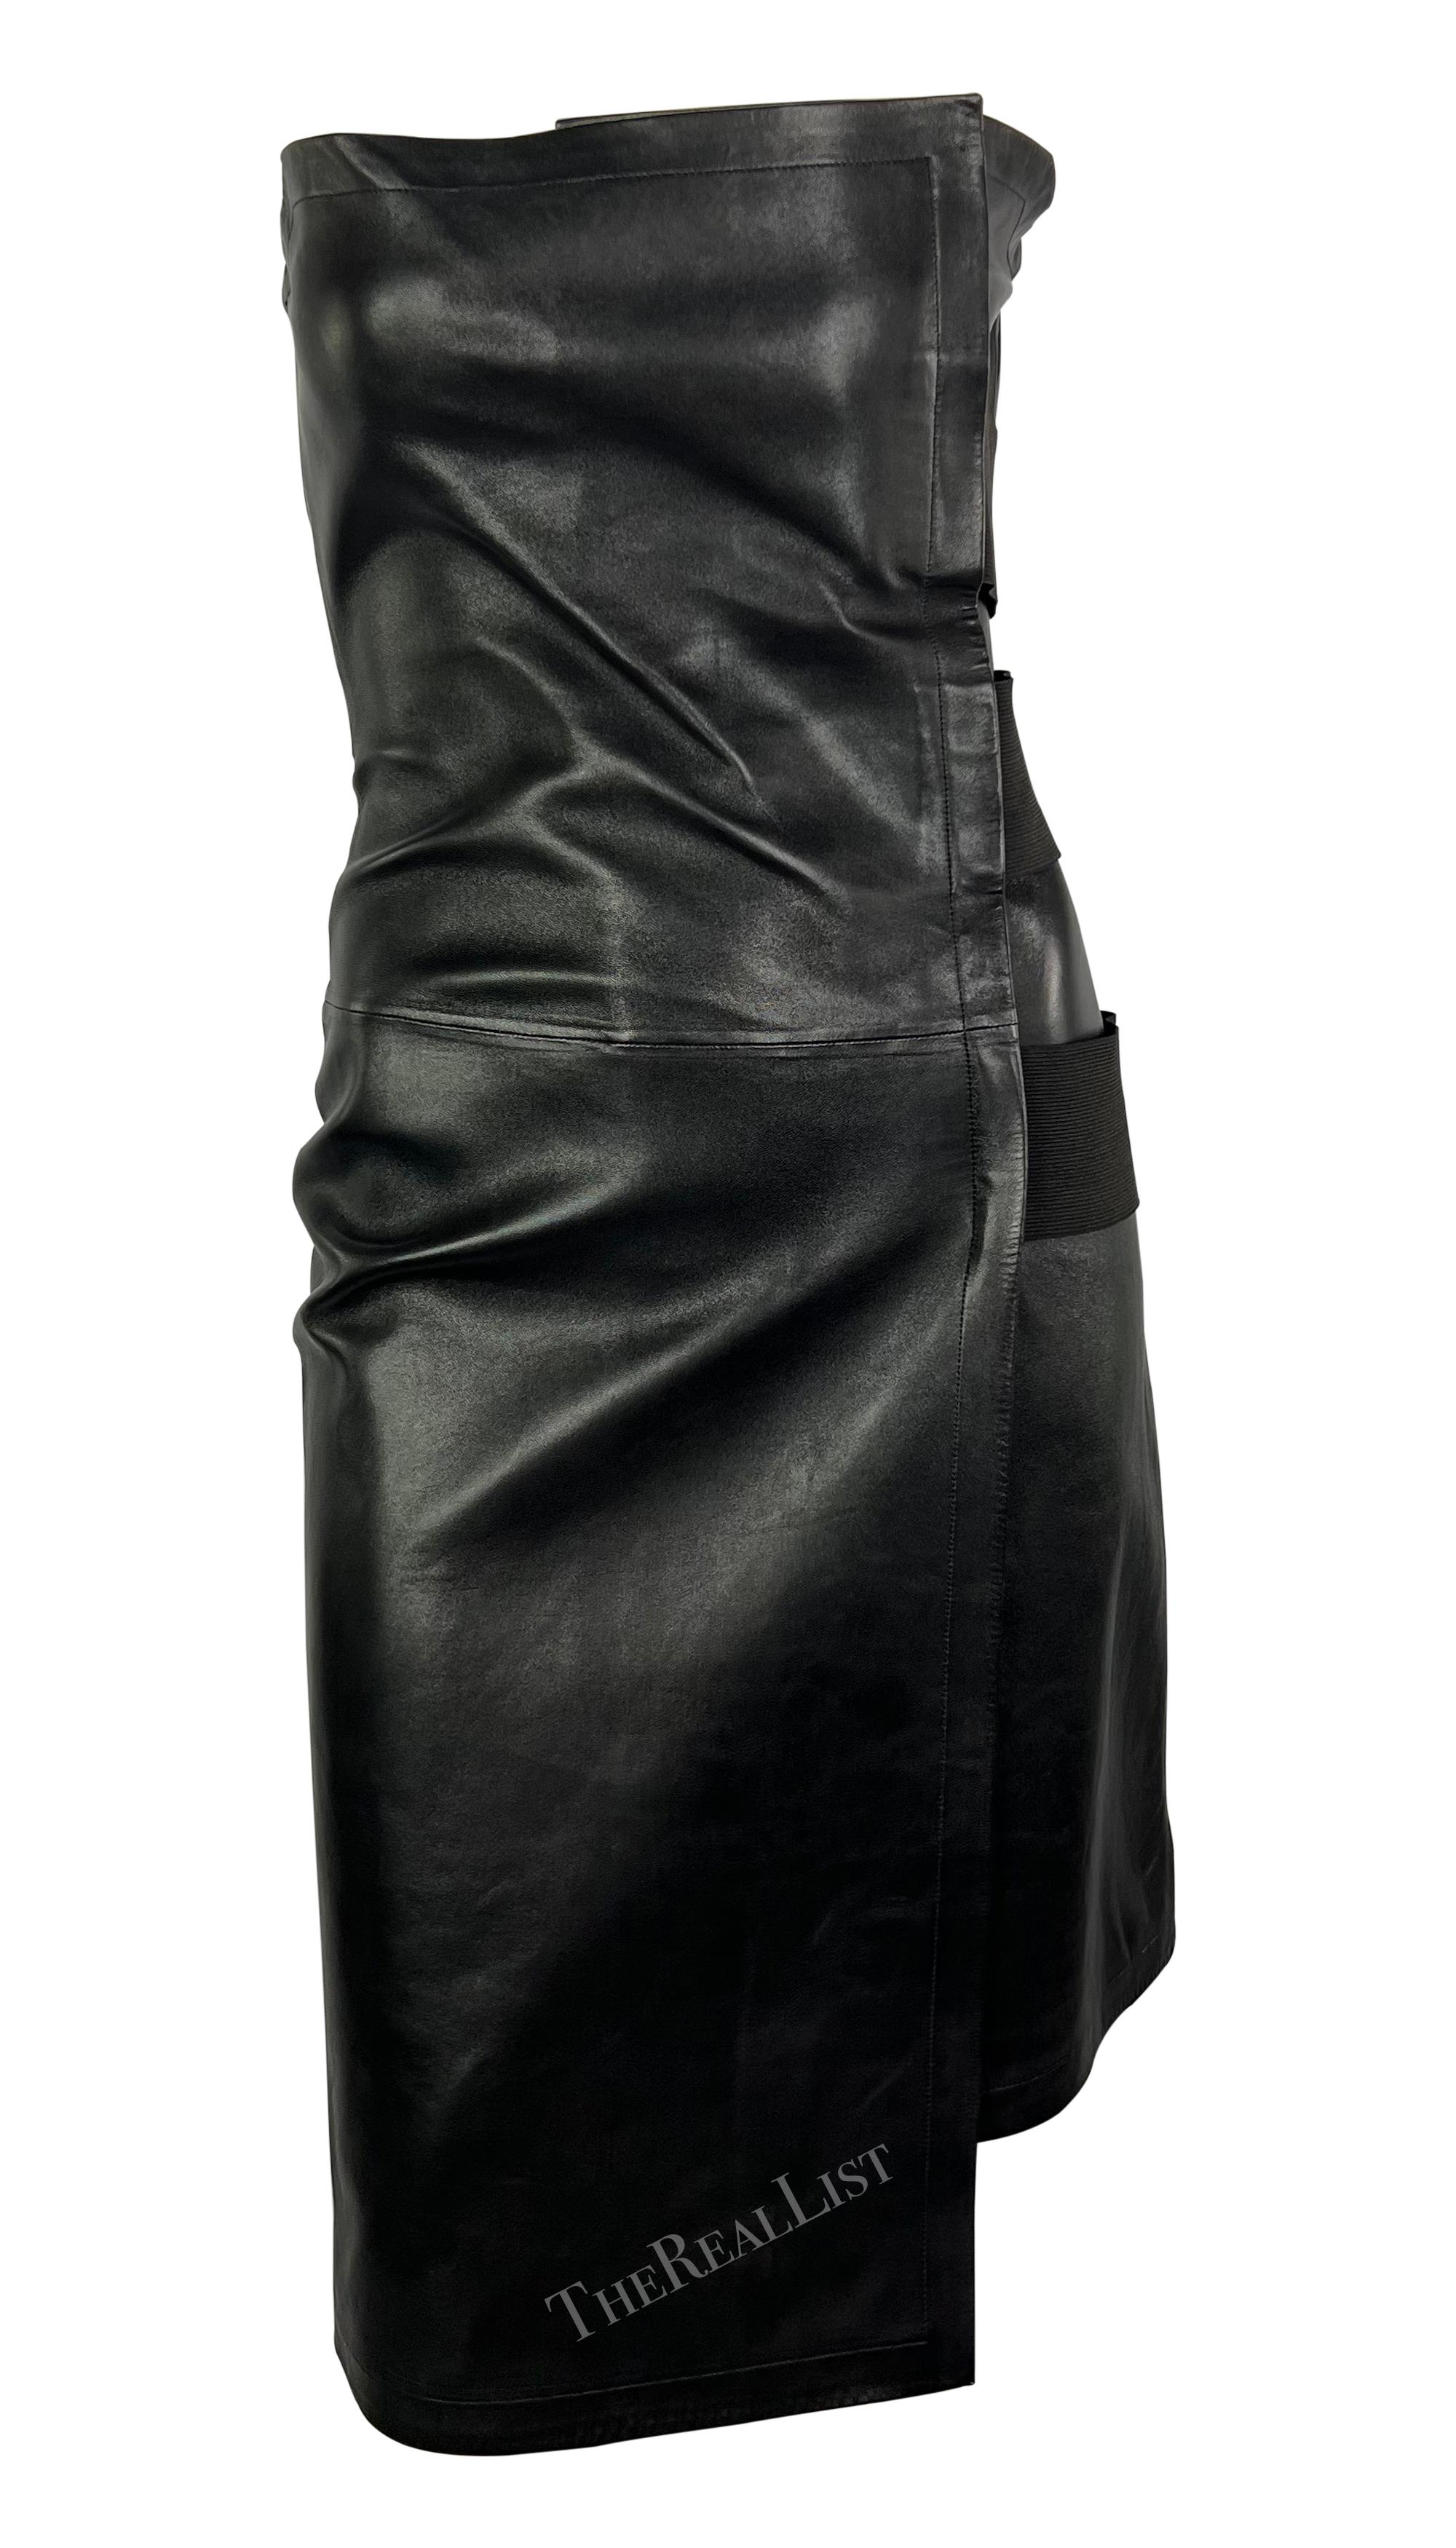 S/S 2001 Yves Saint Laurent by Tom Ford Black Leather Strapless Bandage Dress For Sale 3